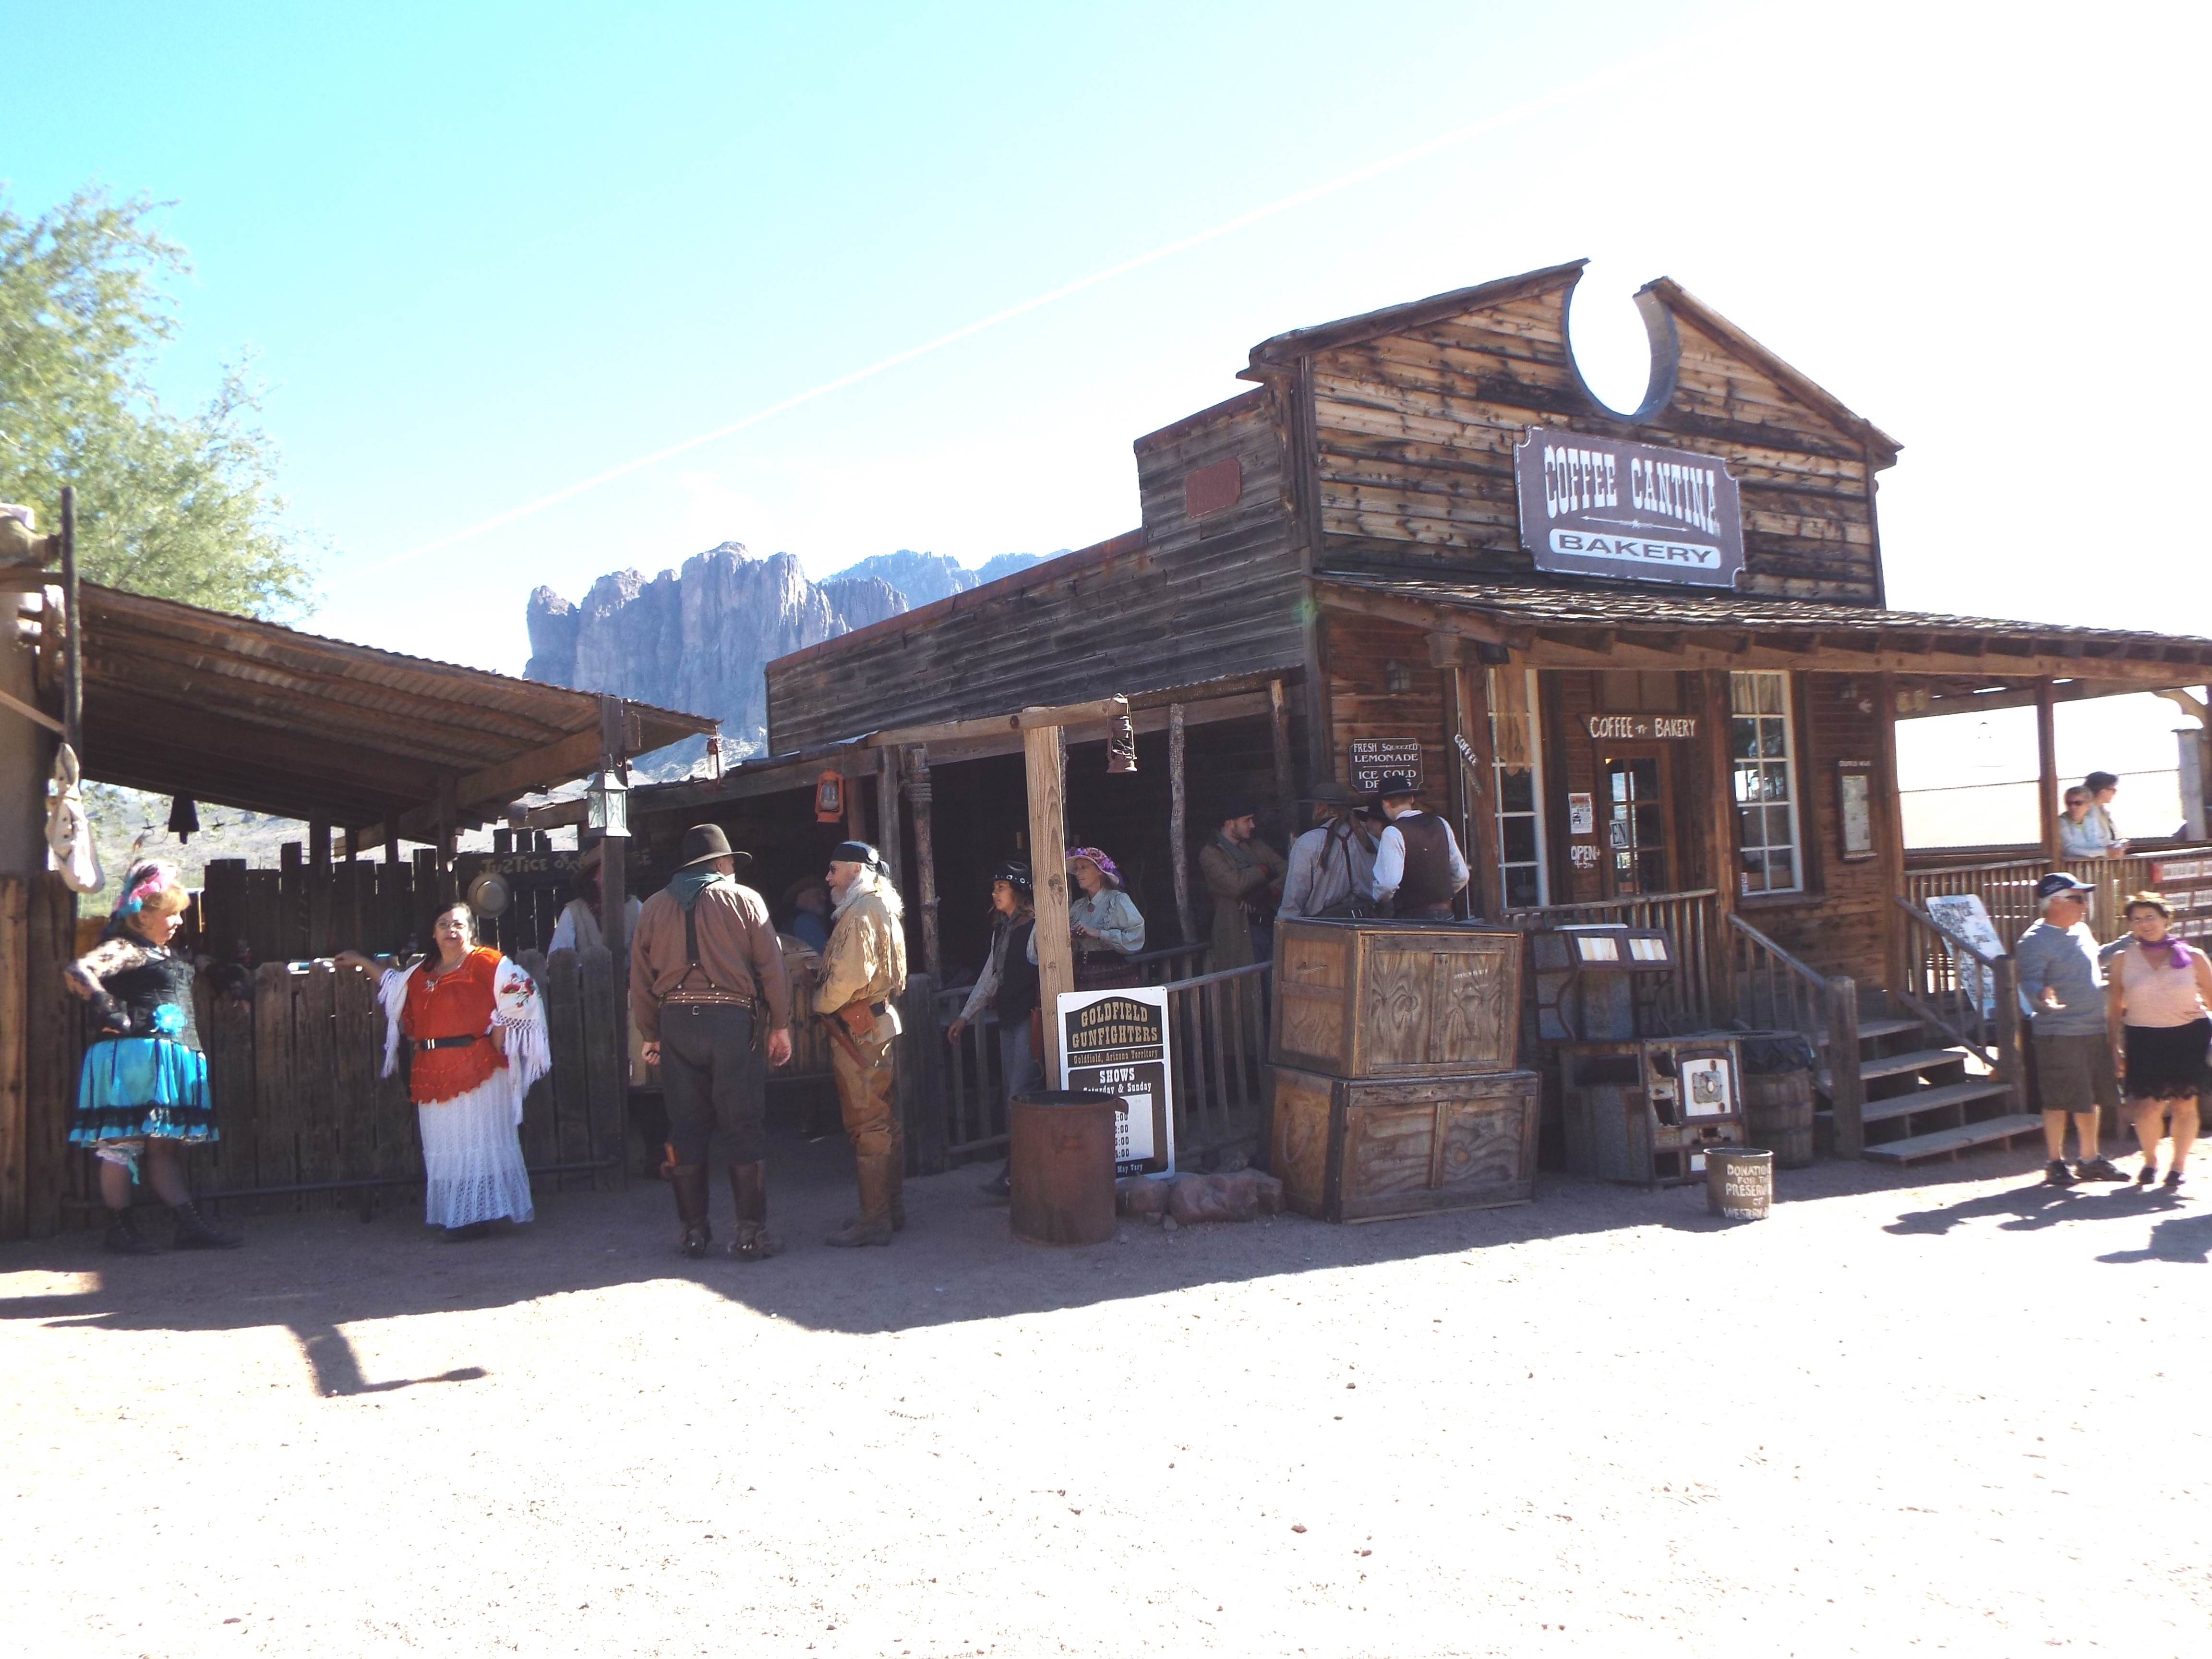 Goldfield Ghost Town, Day Trip on the Apache Trail Arizona